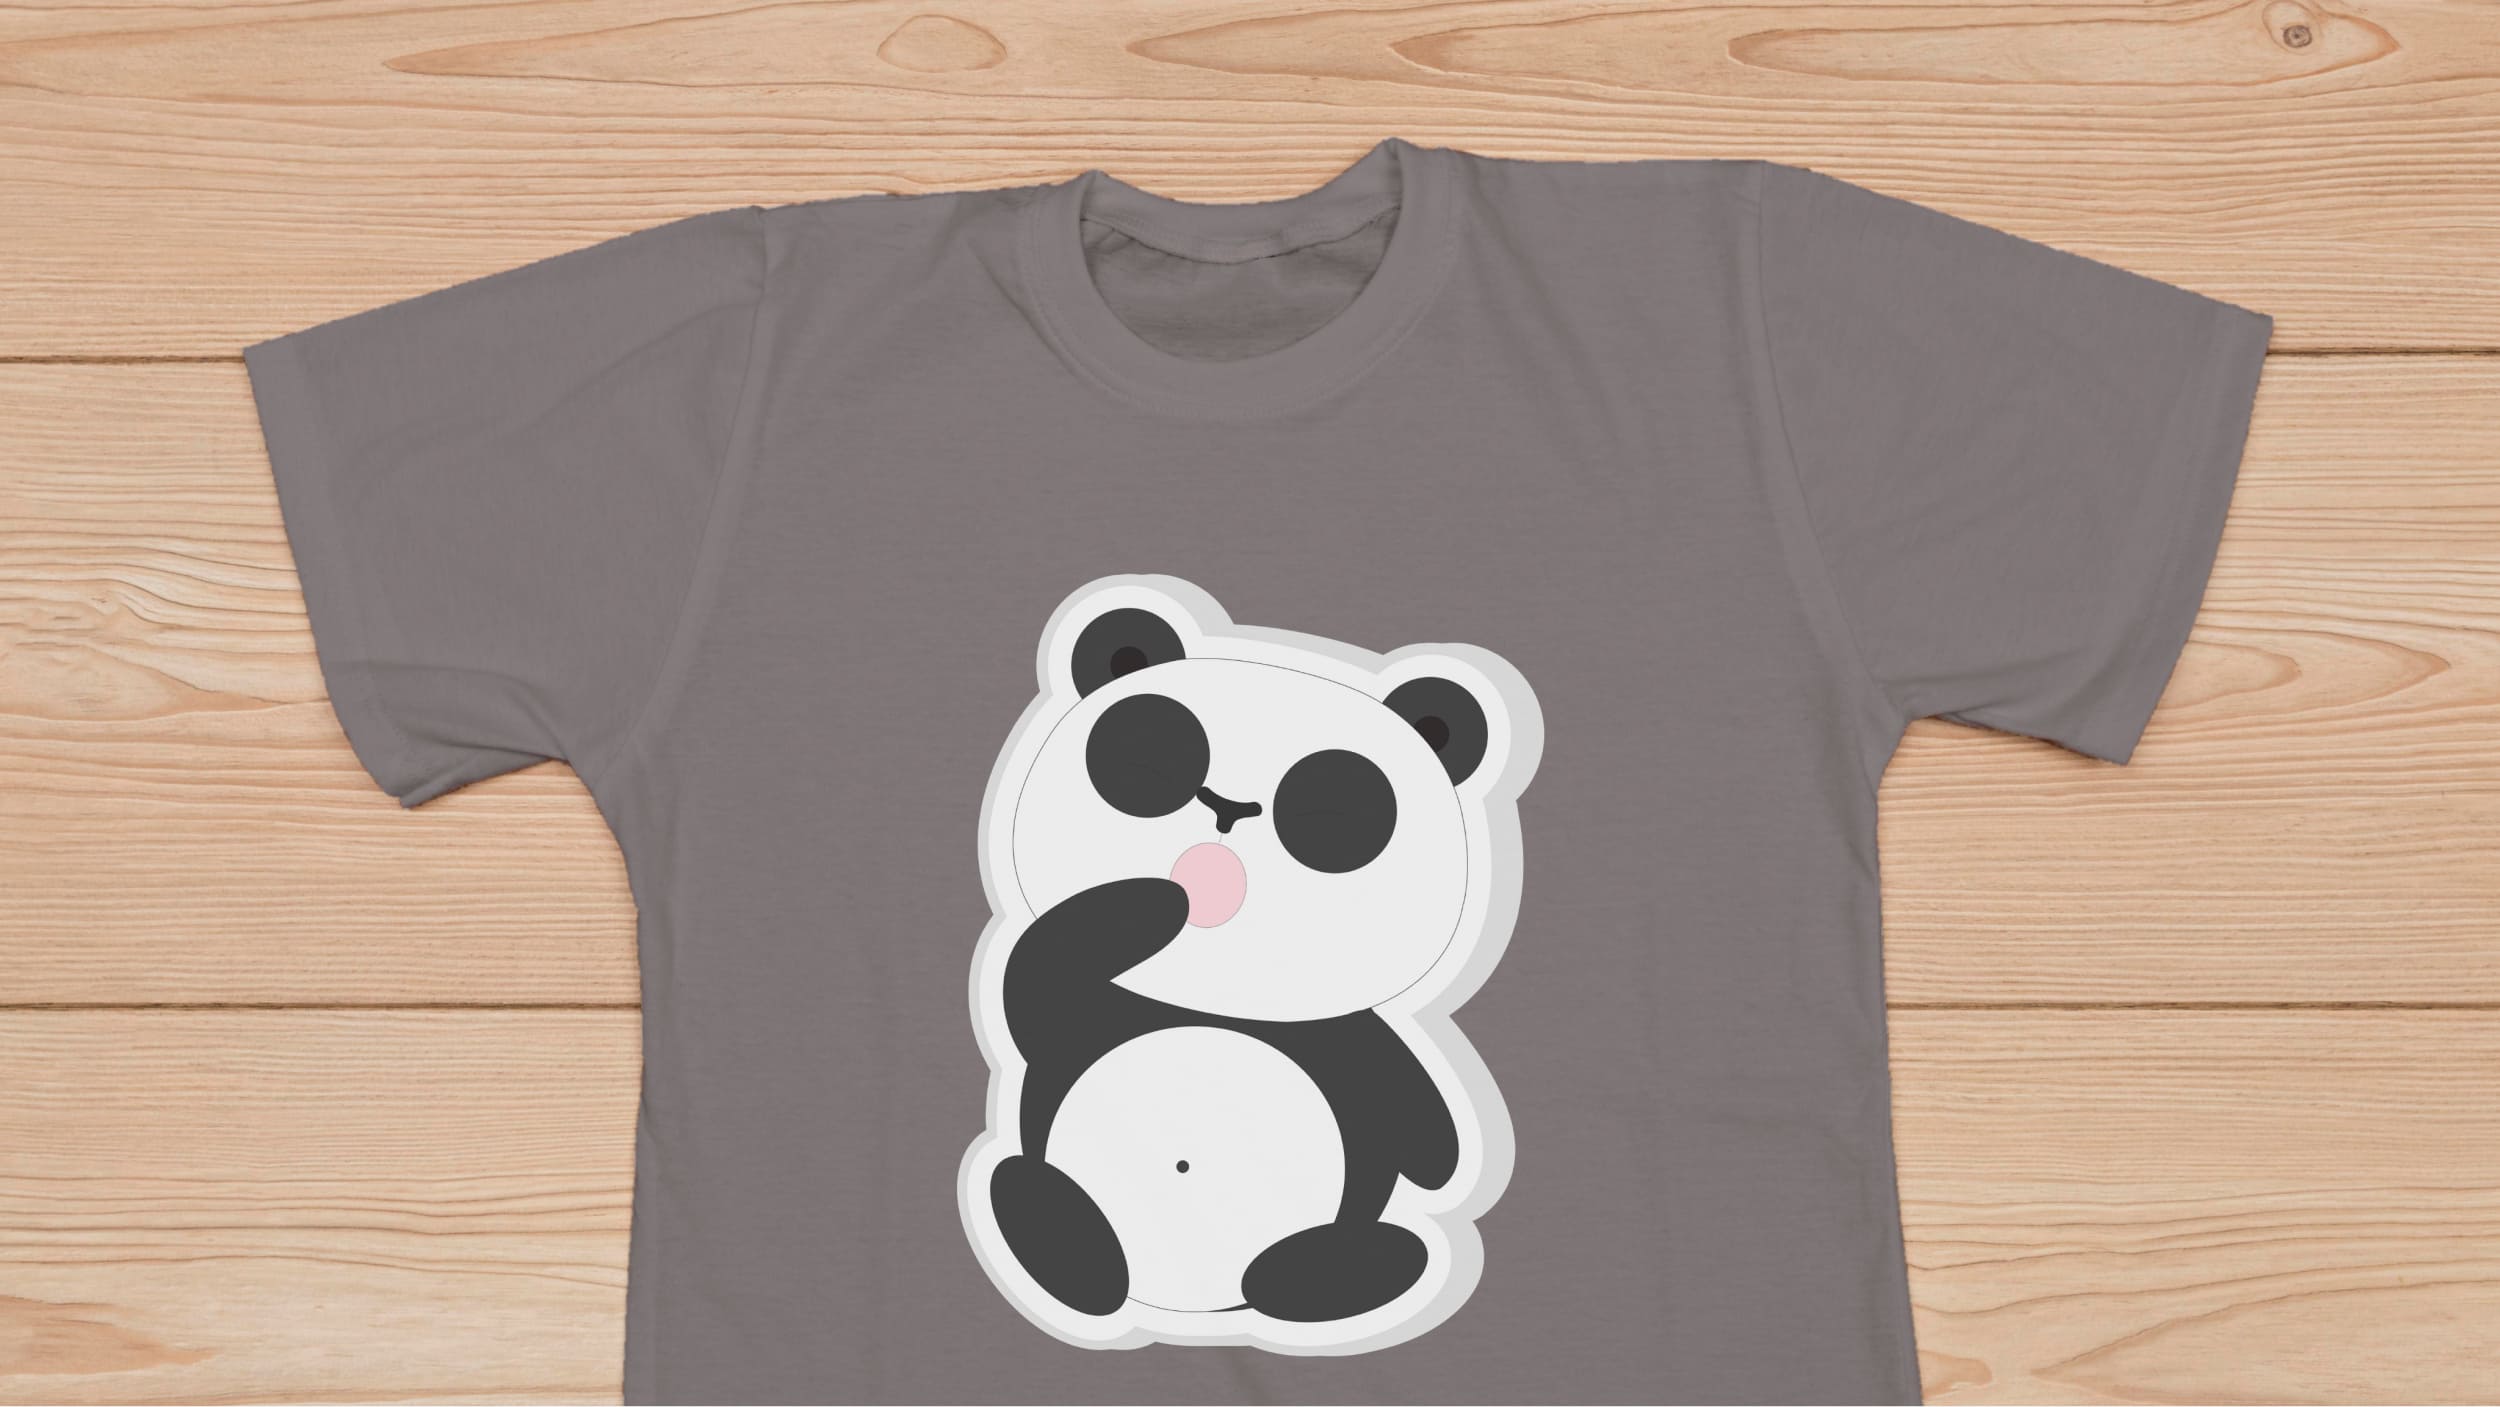 Gray t-shirt with panda bear on a wooden background.